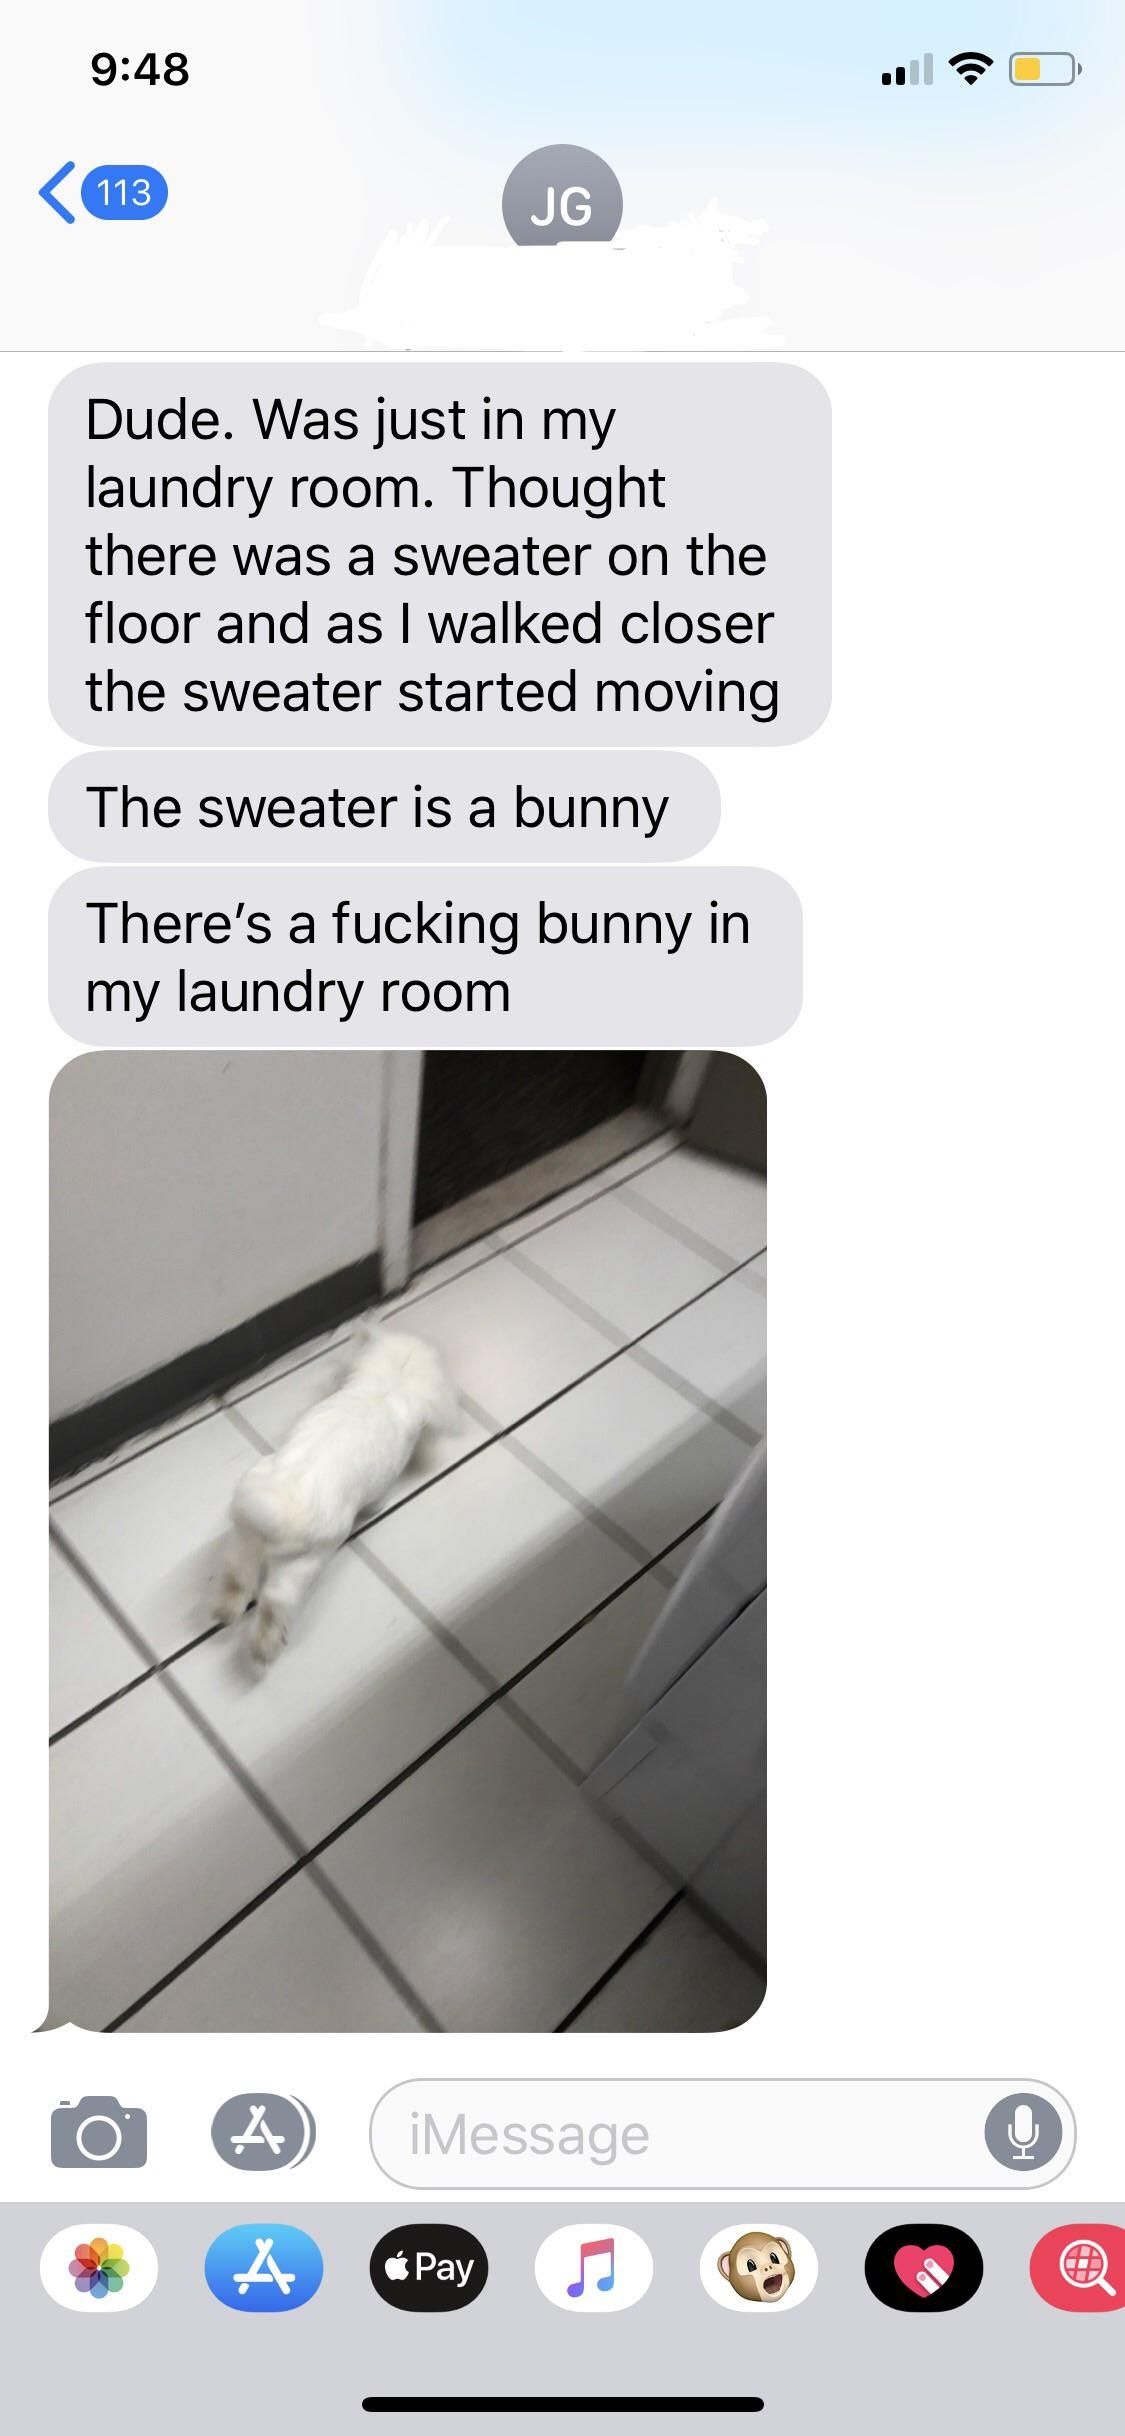 My friend found a bunny in his laundry room and I can’t stop laughing